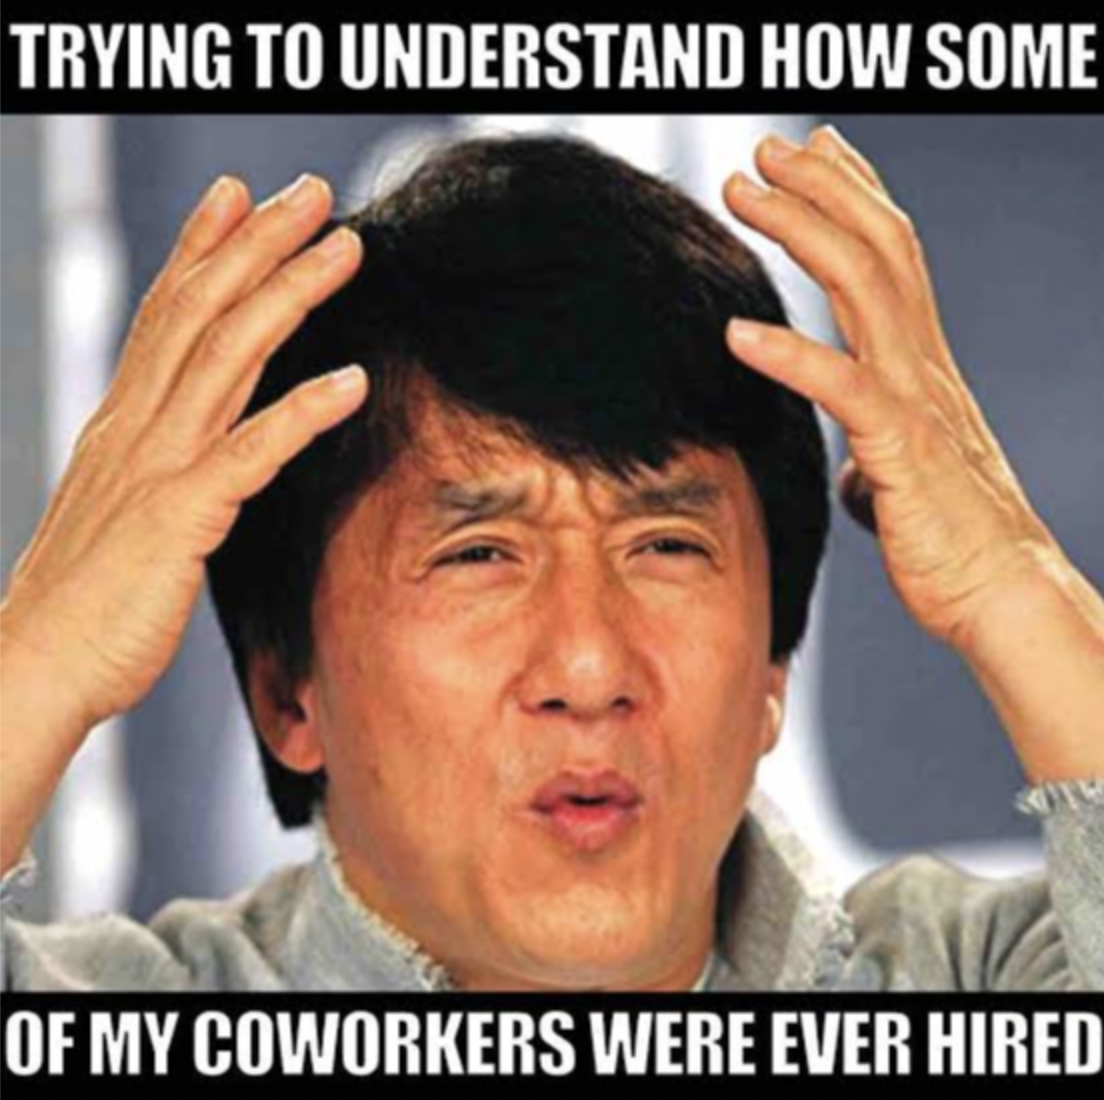 photo caption - Trying To Understand How Some Of My Coworkers Were Ever Hired